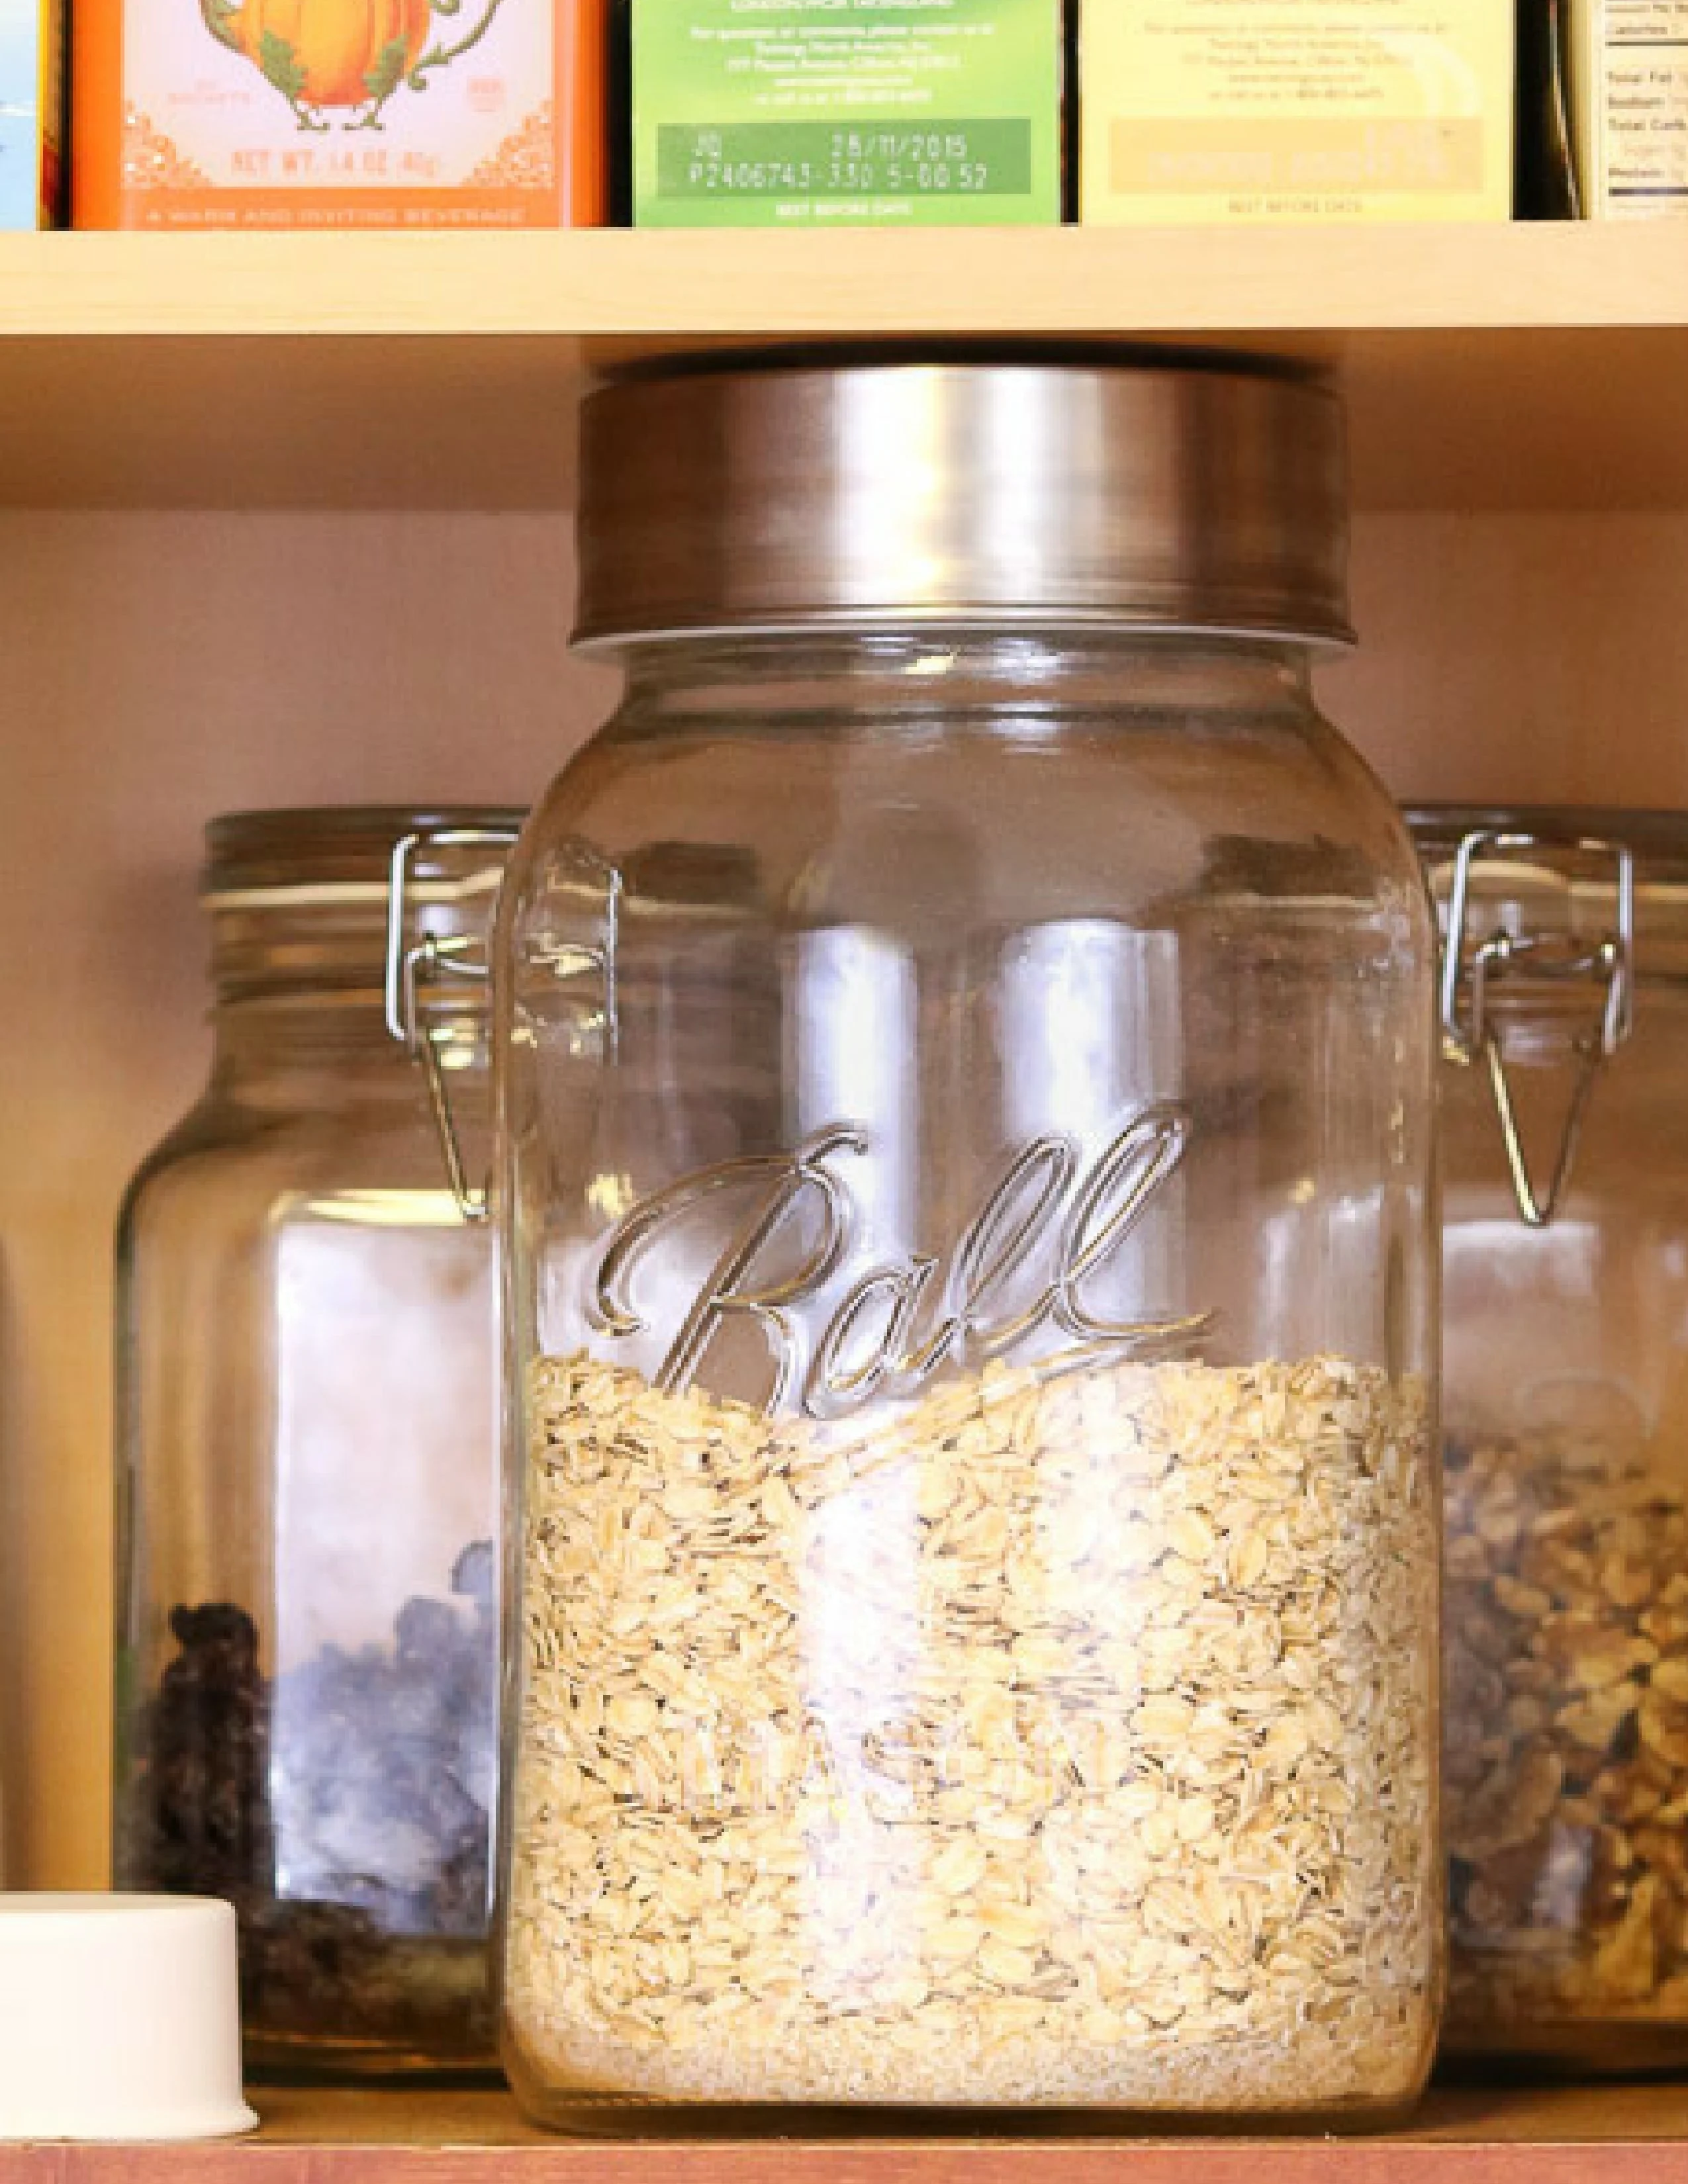 How to organize kitchen cabinets by zones.  A breakfast zone with a mason jar full of oats and other jars with toppings.